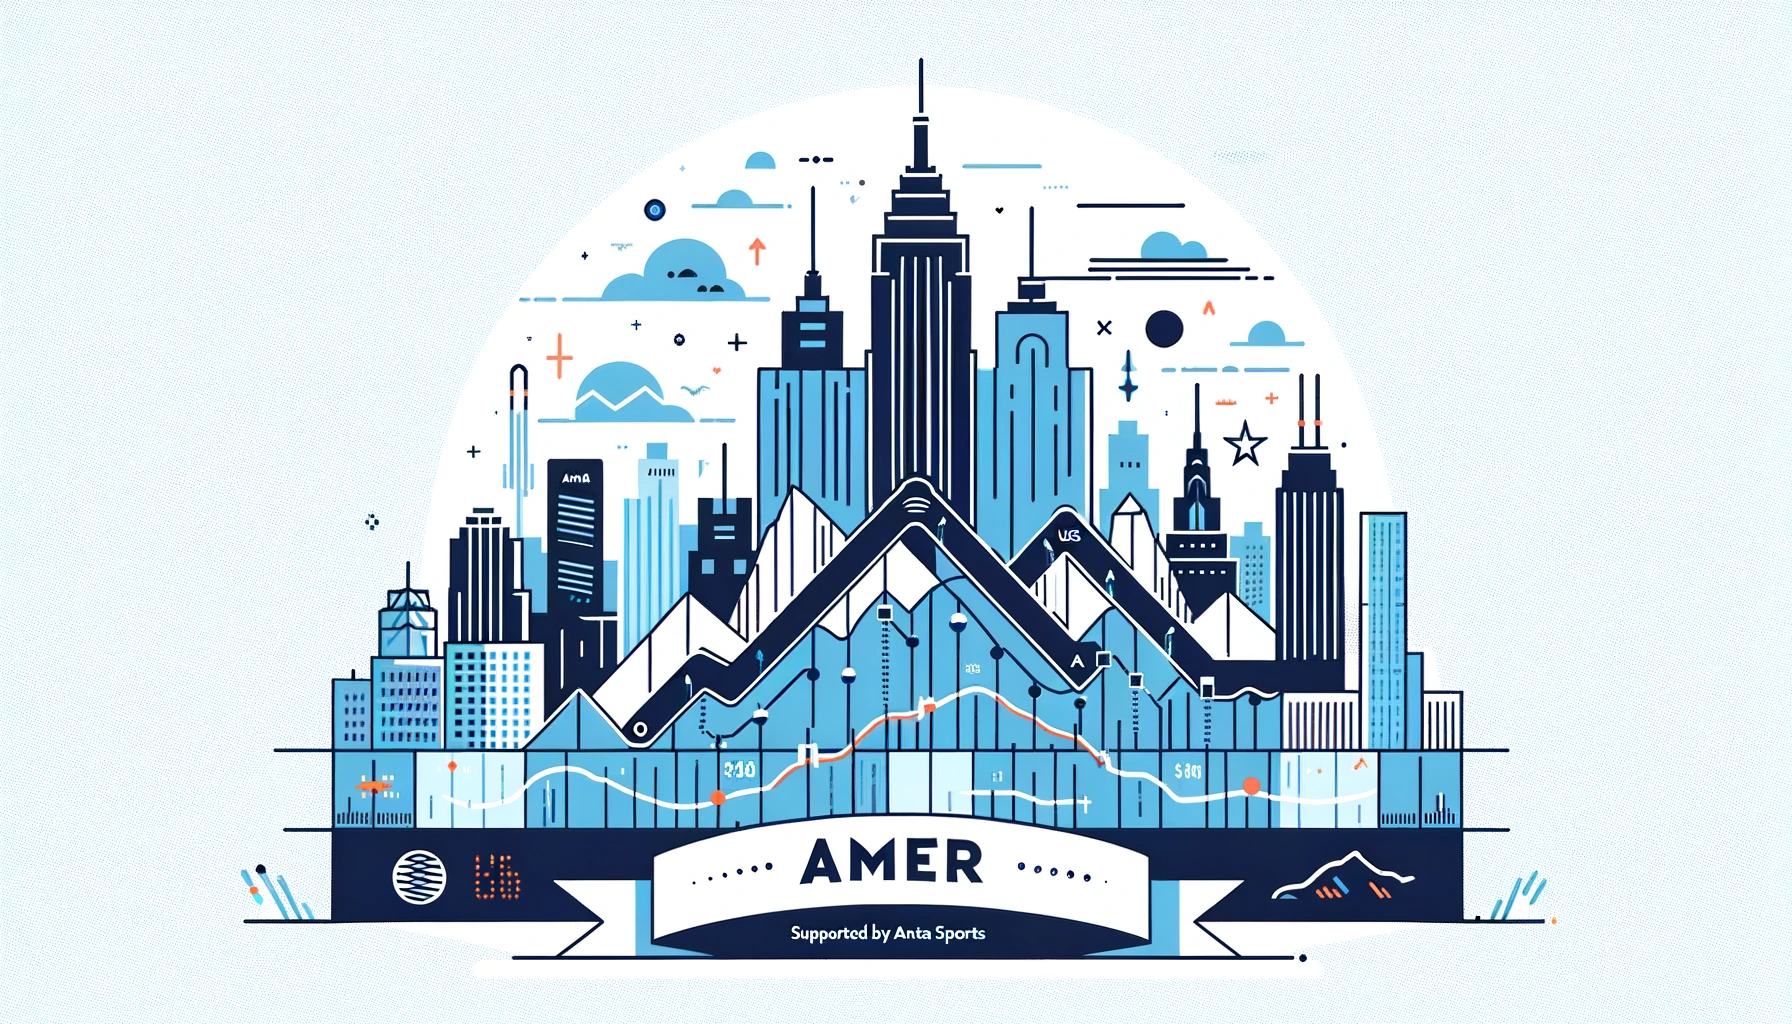 Amer, supported by Anta Sports, successfully launches in New York following a US$1.4 billion stock offering